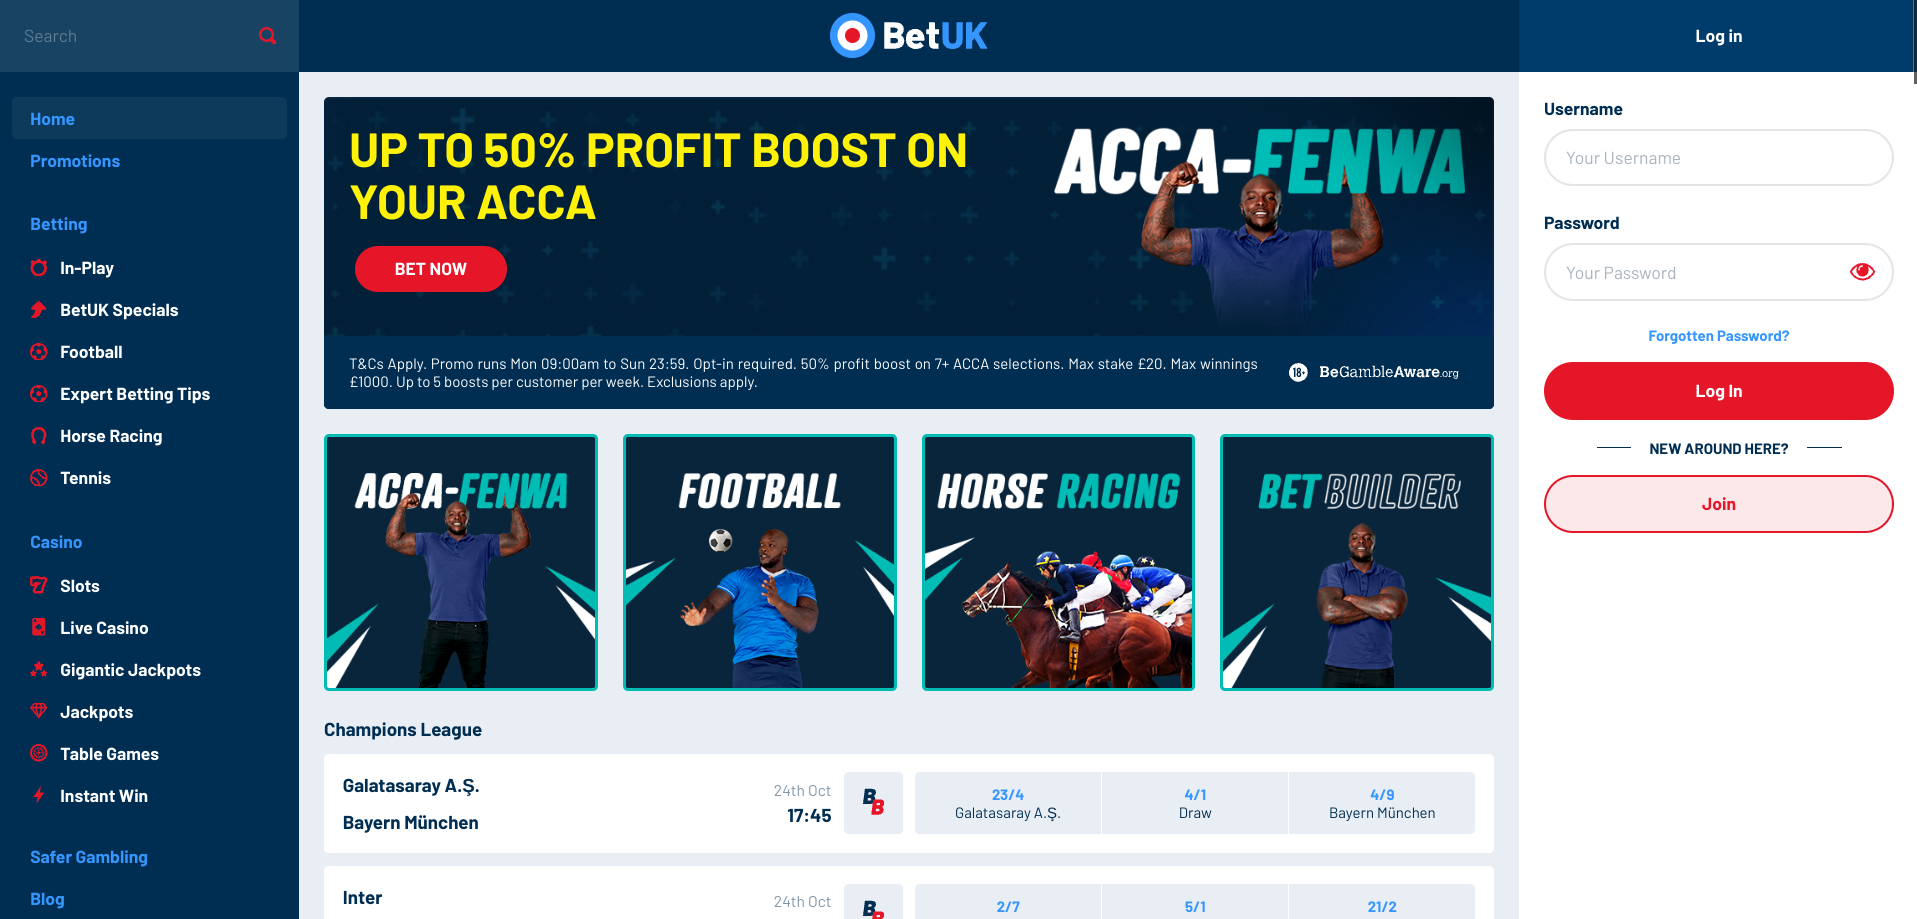 How to claim the Bet UK sign up offer